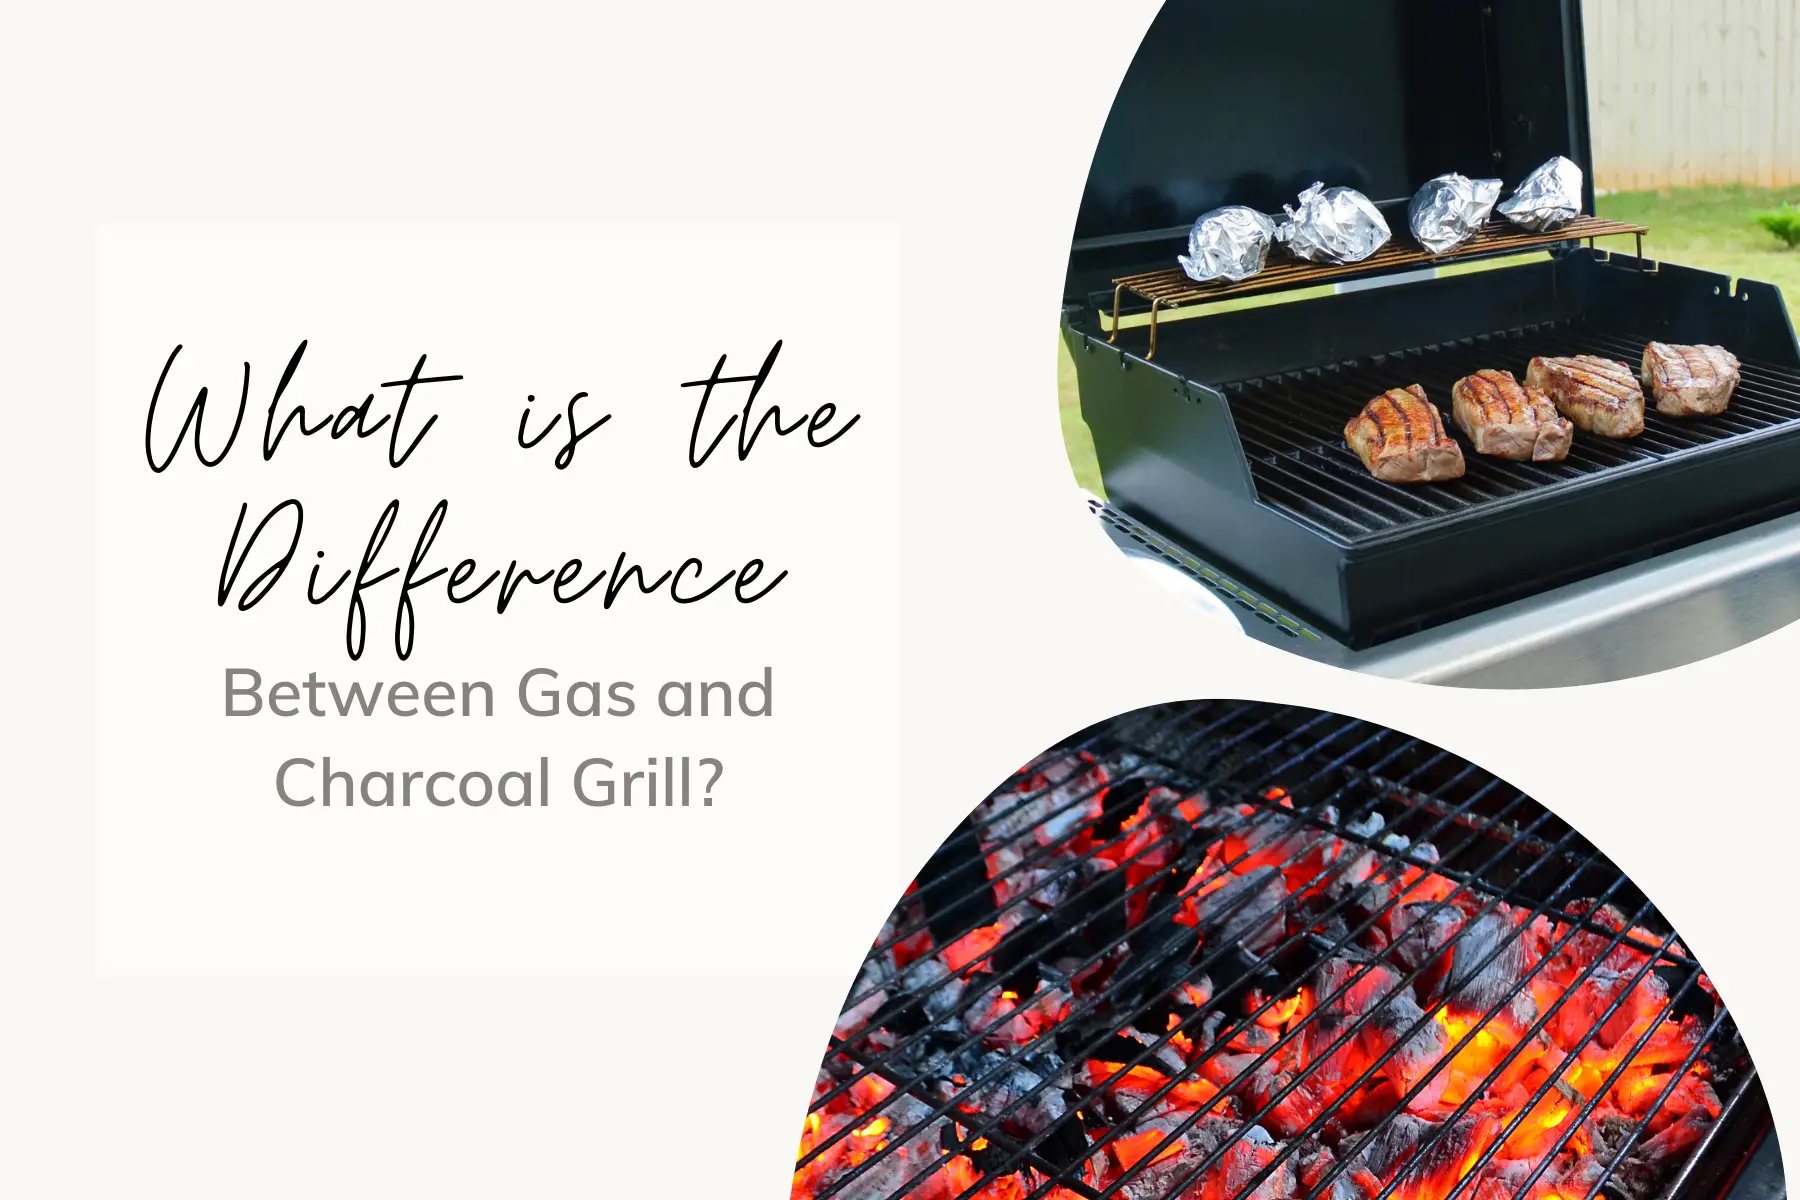 What is the difference between a charcoal and gas grill